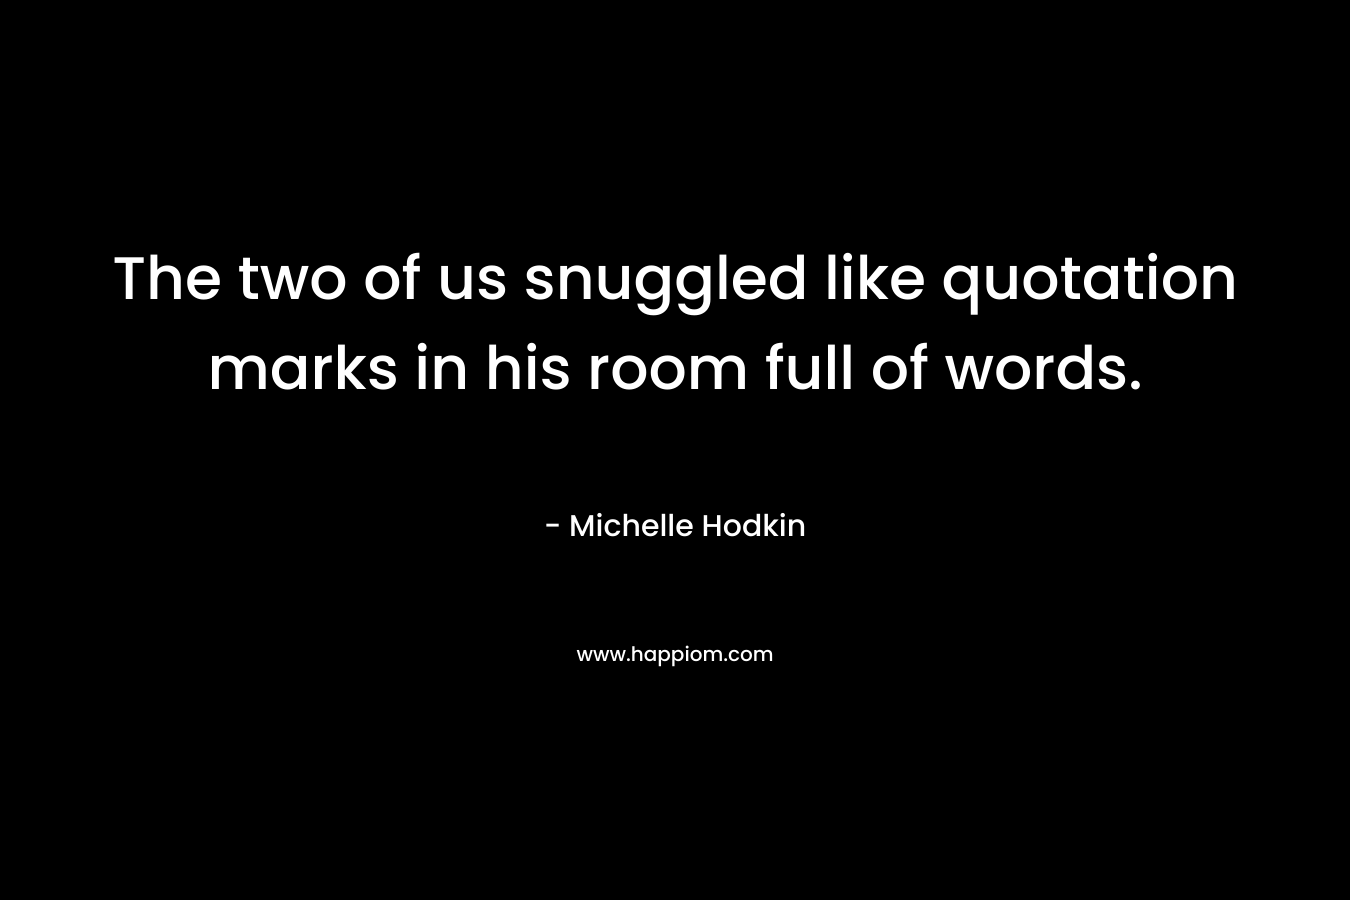 The two of us snuggled like quotation marks in his room full of words. – Michelle Hodkin